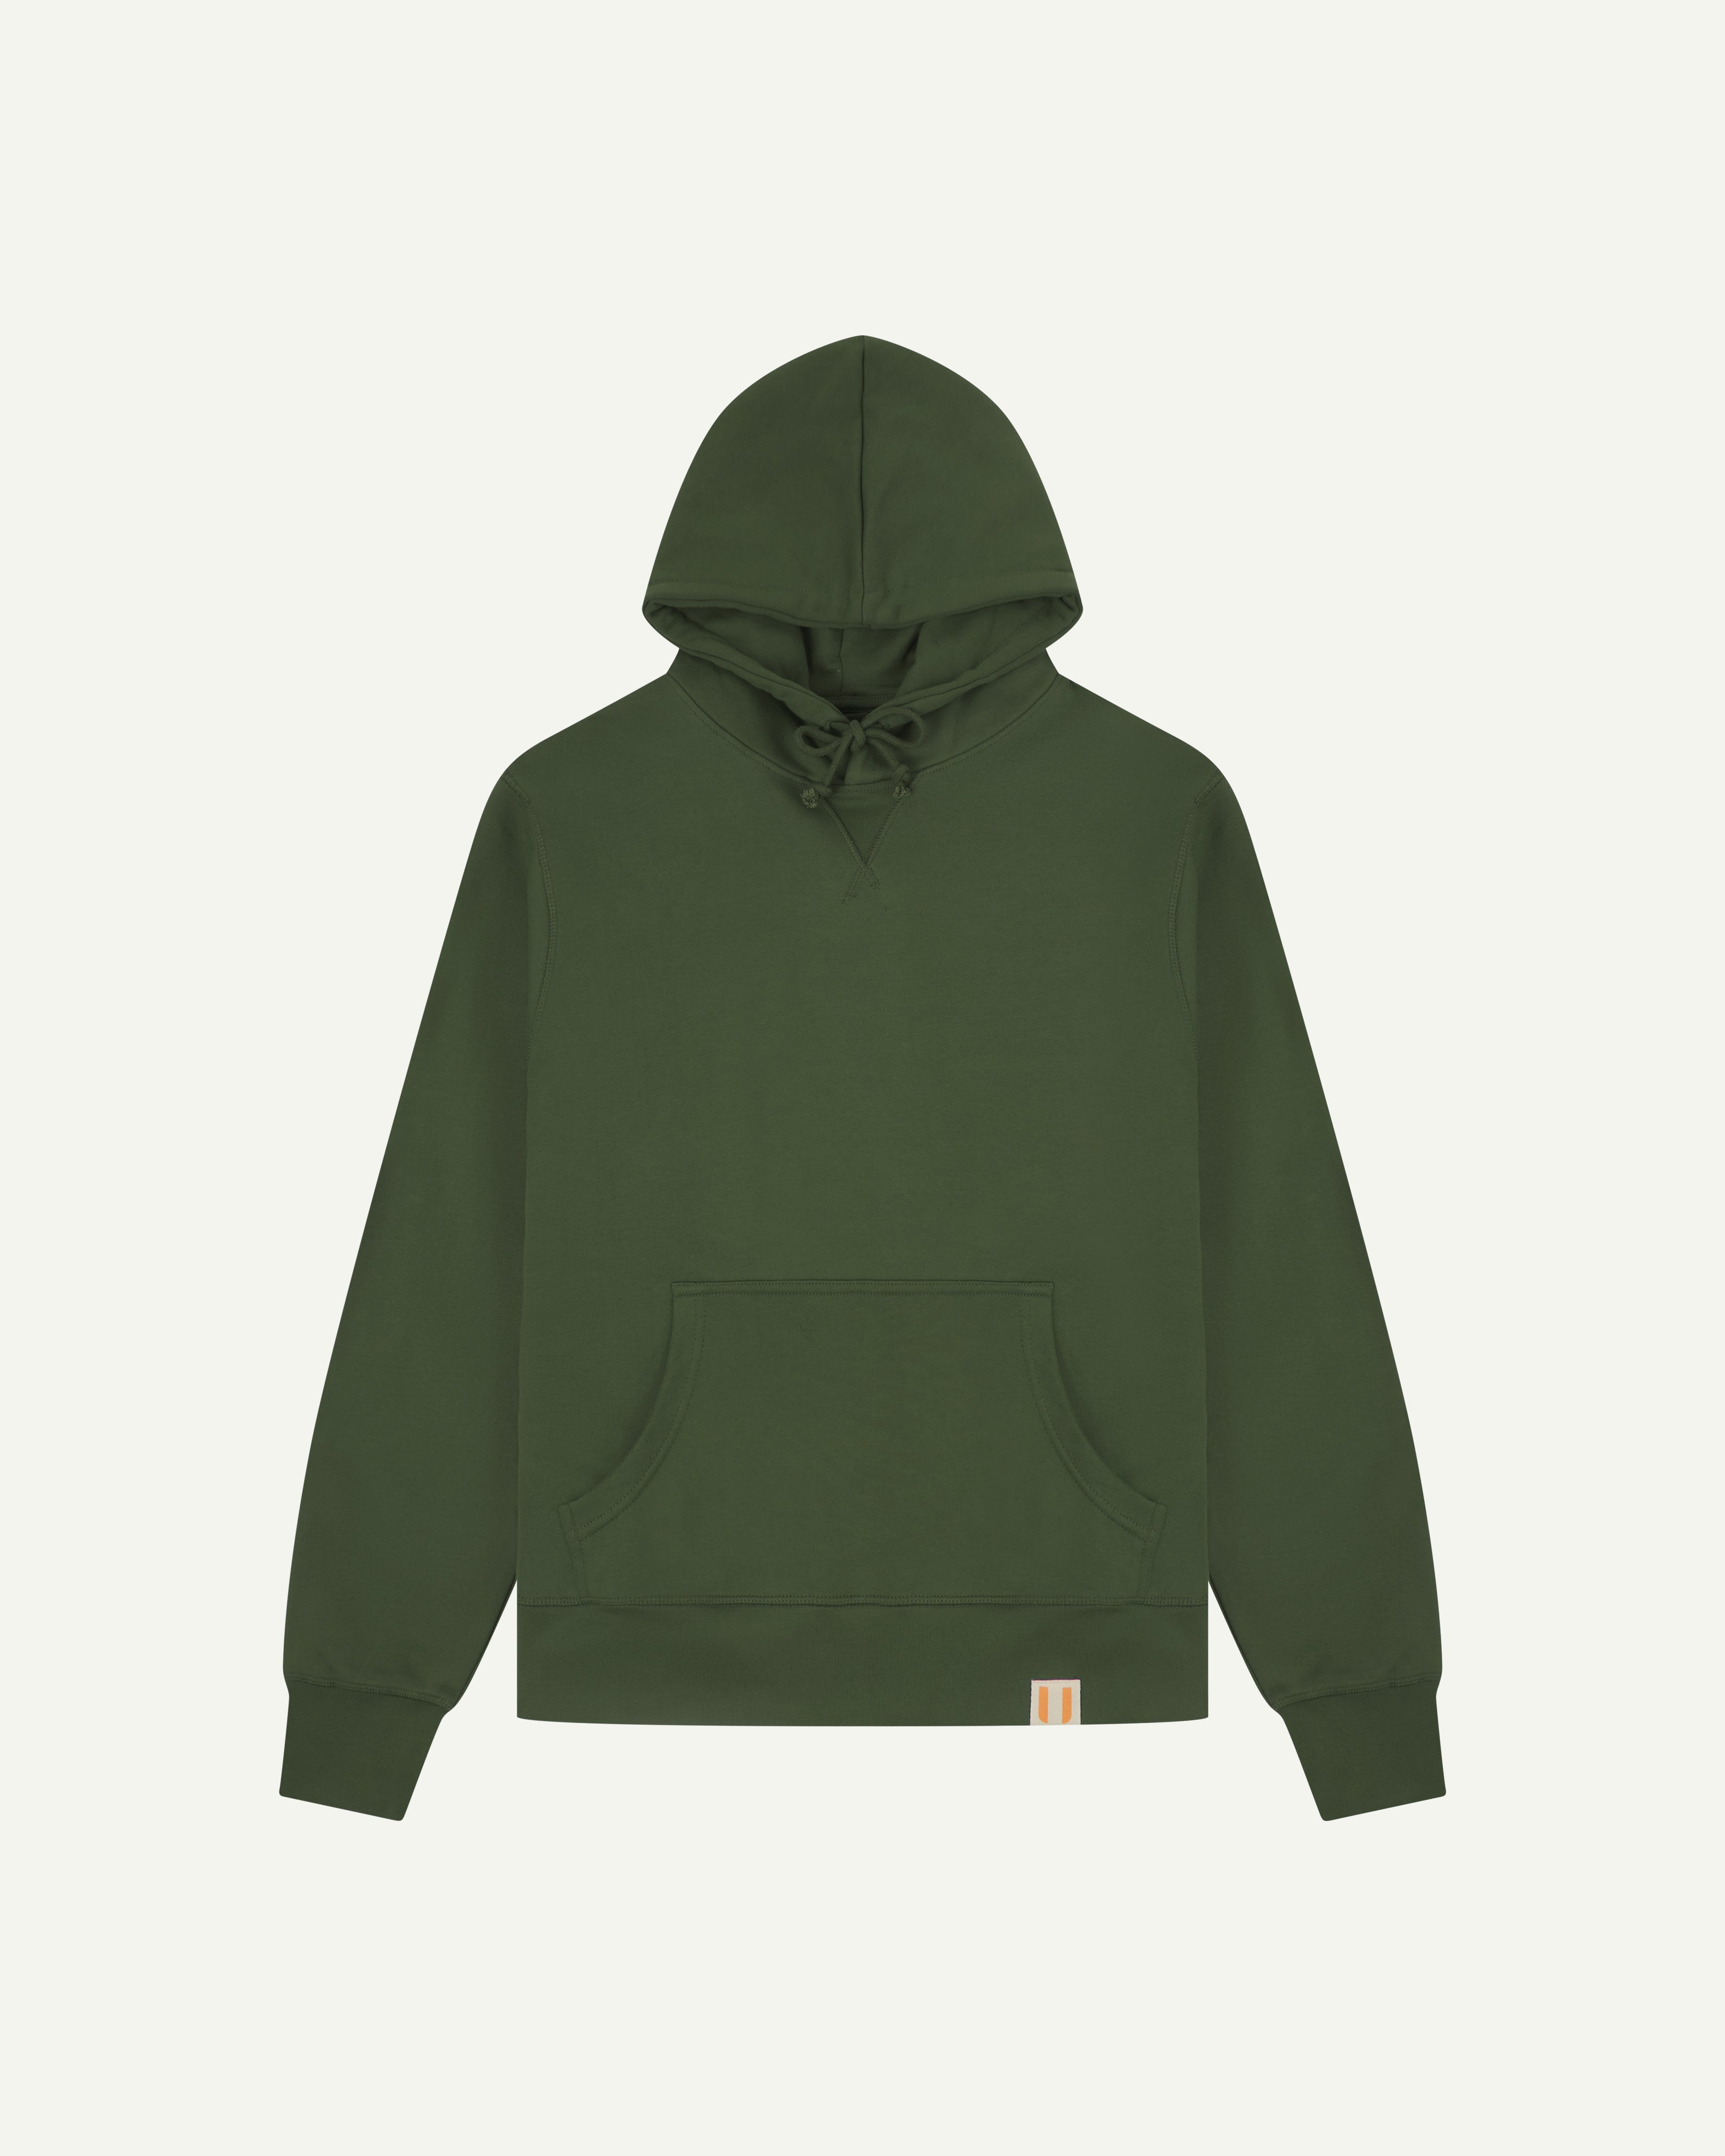 Front flat view of uskees green hoodie for men showing brand logo and kangaroo front pocket